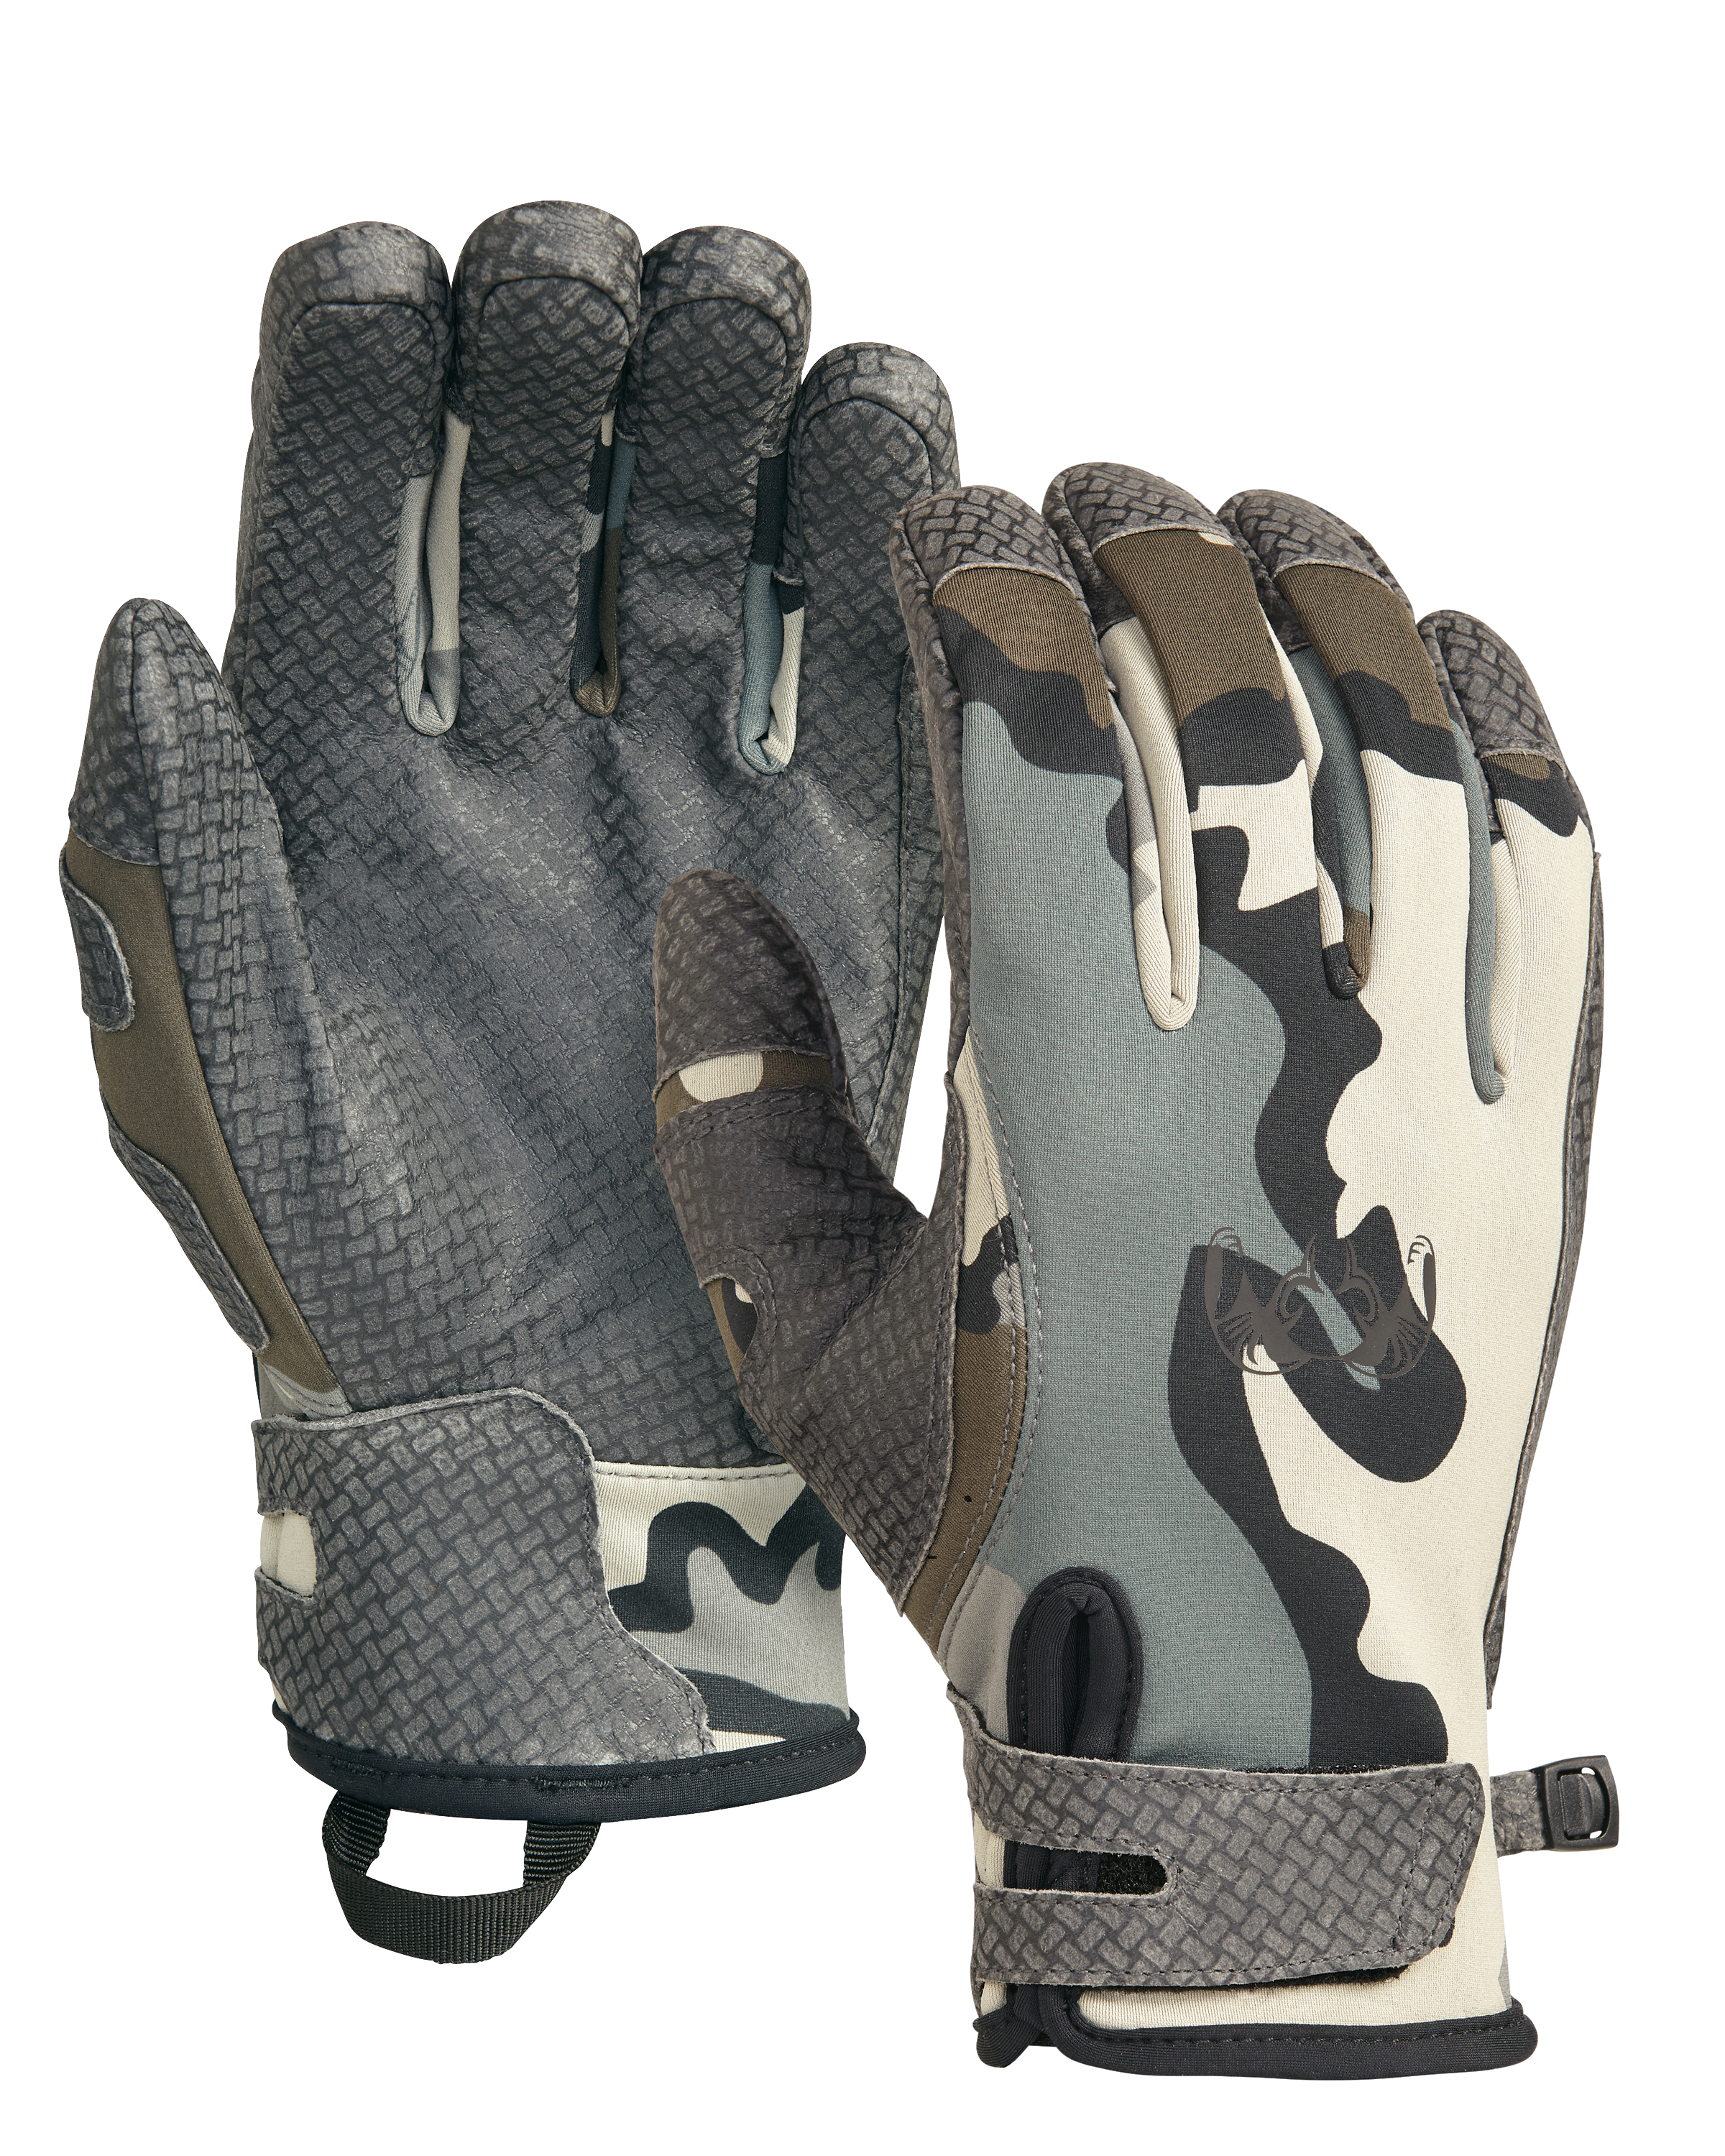 KUIU Guide X Hunting Glove in Vias | Size XL